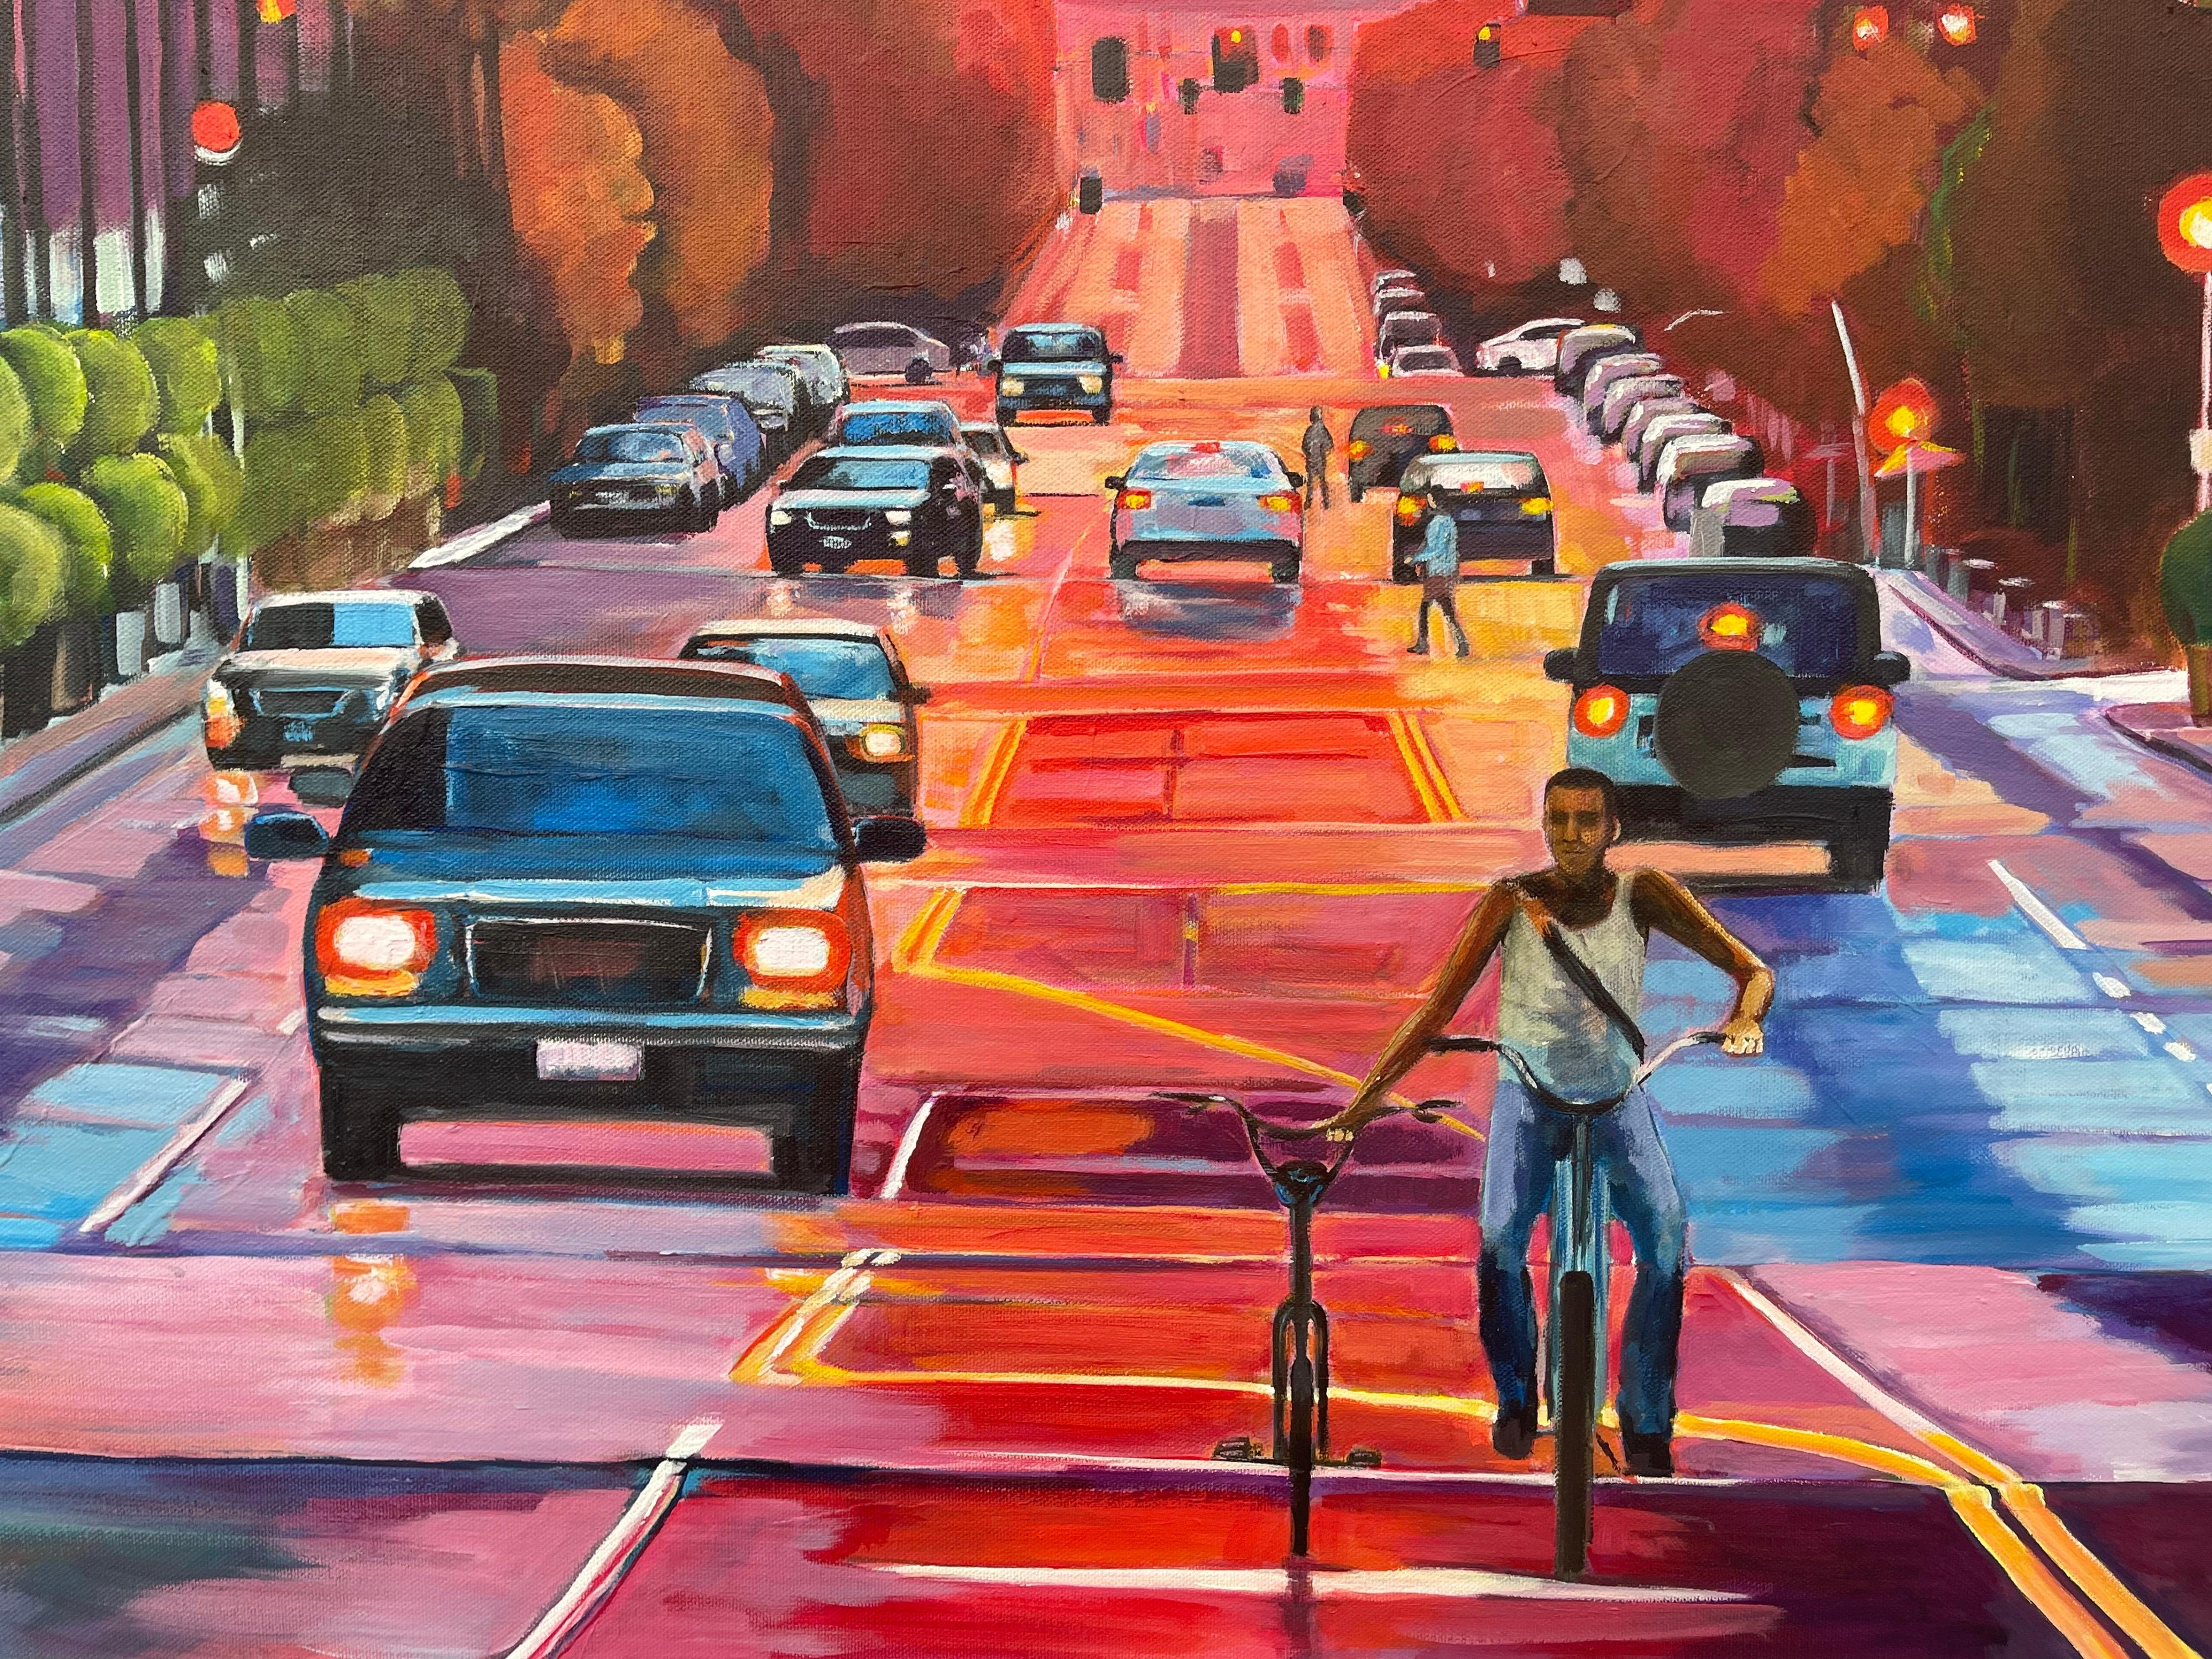 Sunset at Washington Avenue Historic District St Louis Missouri by Contemporary British Artist Angela Wakefield. Rich orange, pink, yellow and purple colours create atmosphere and give this original a vibrant glow. 

Art measures 48 x 36